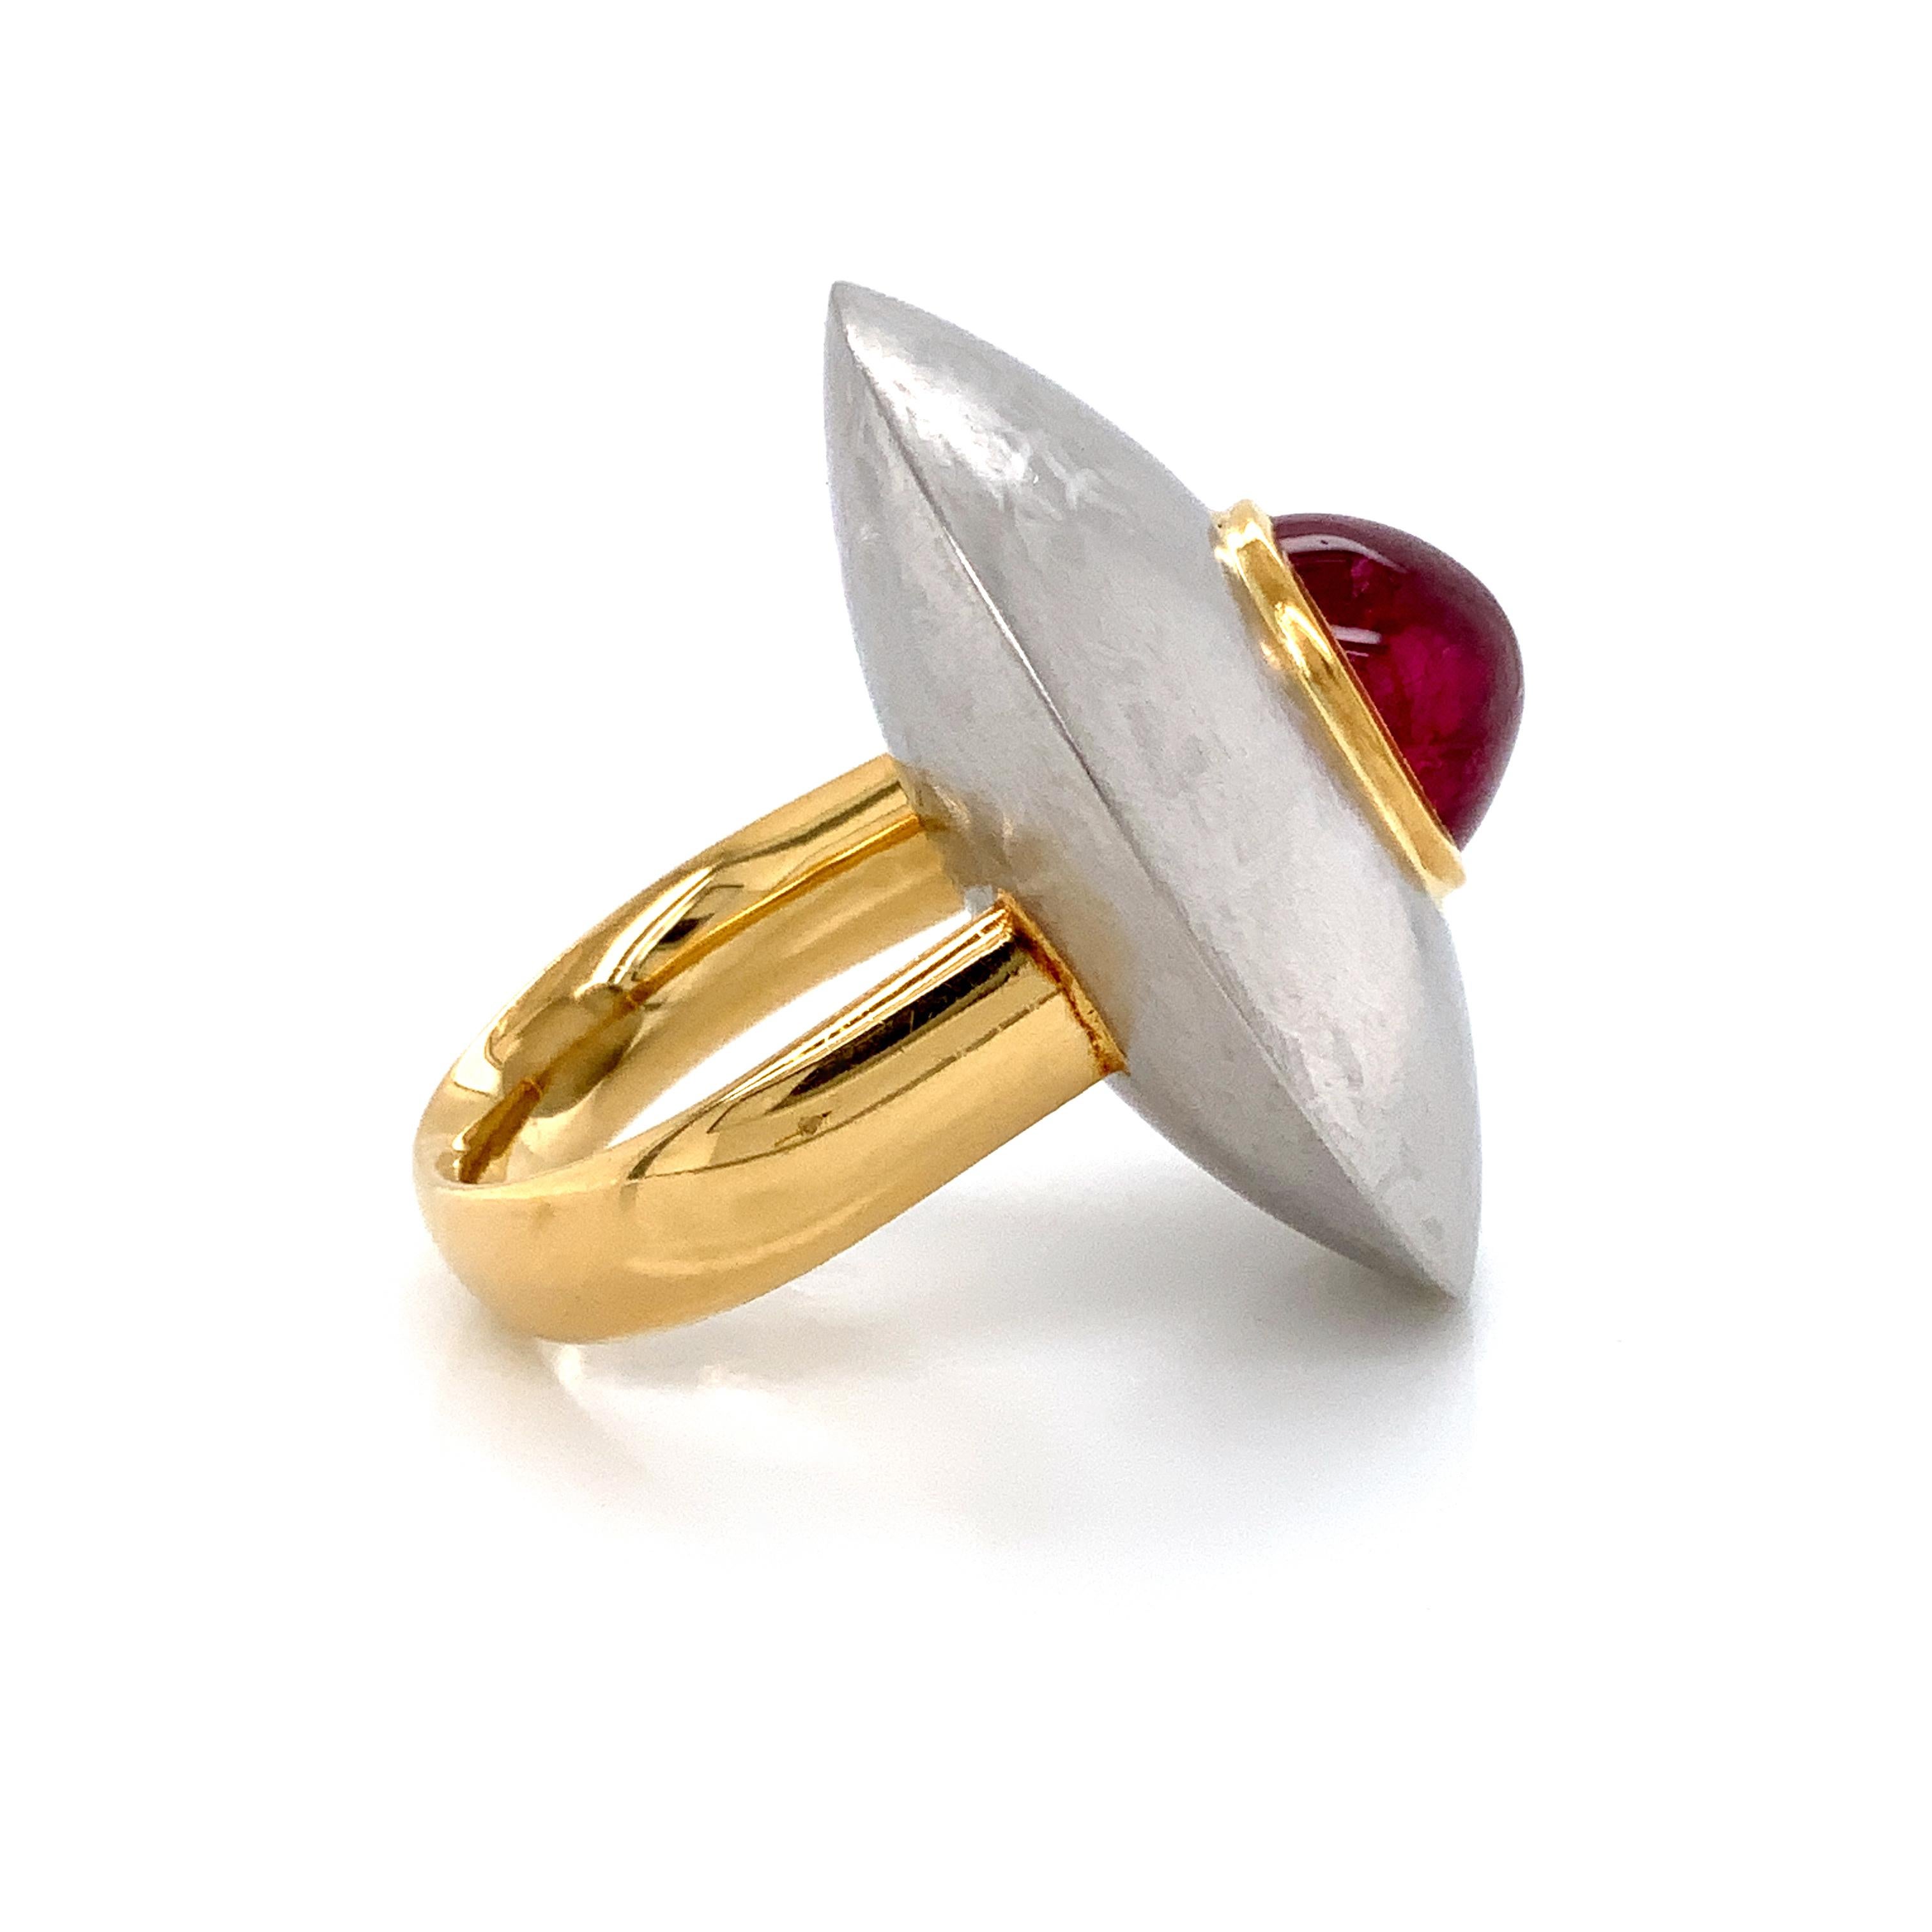 Contemporary Georg Spreng - Sunny Side Ring Gold Platinum 950 with oval Red Spinel Cabochon For Sale